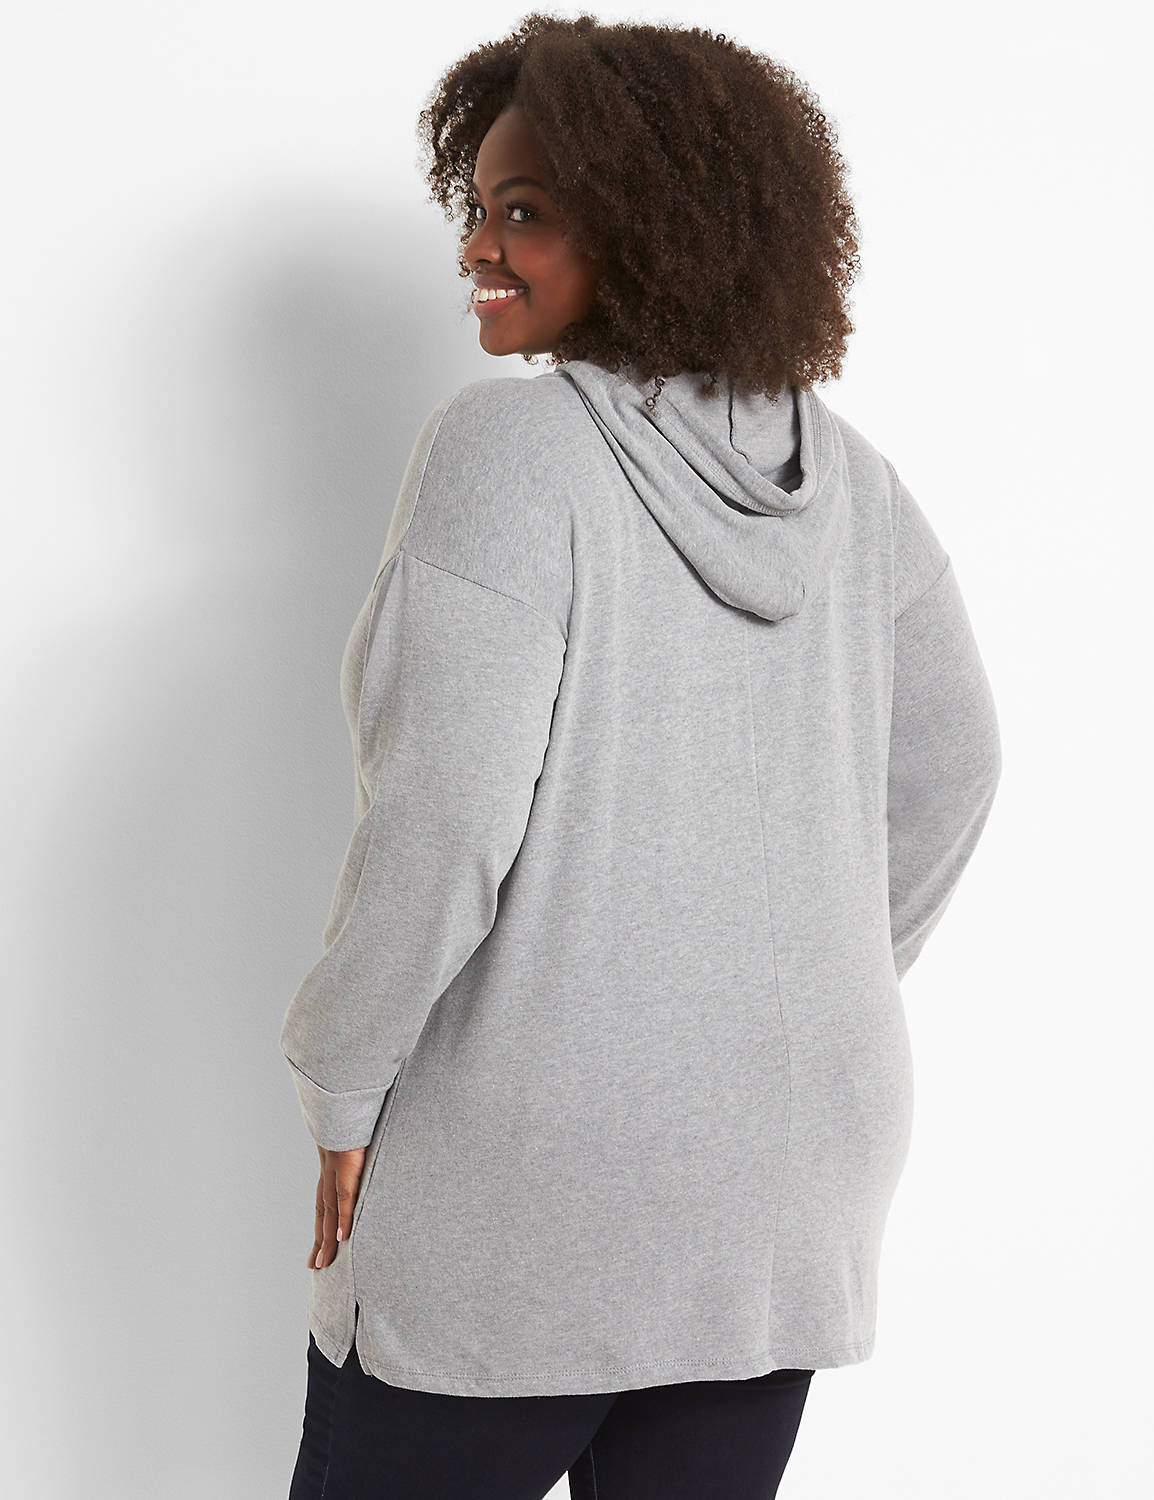 Long Sleeve Drop Shoulder Hoodie Tunic Graphic: Equality Pride 1123088:BTC30 Medium Heather Gray:10/12 Product Image 2